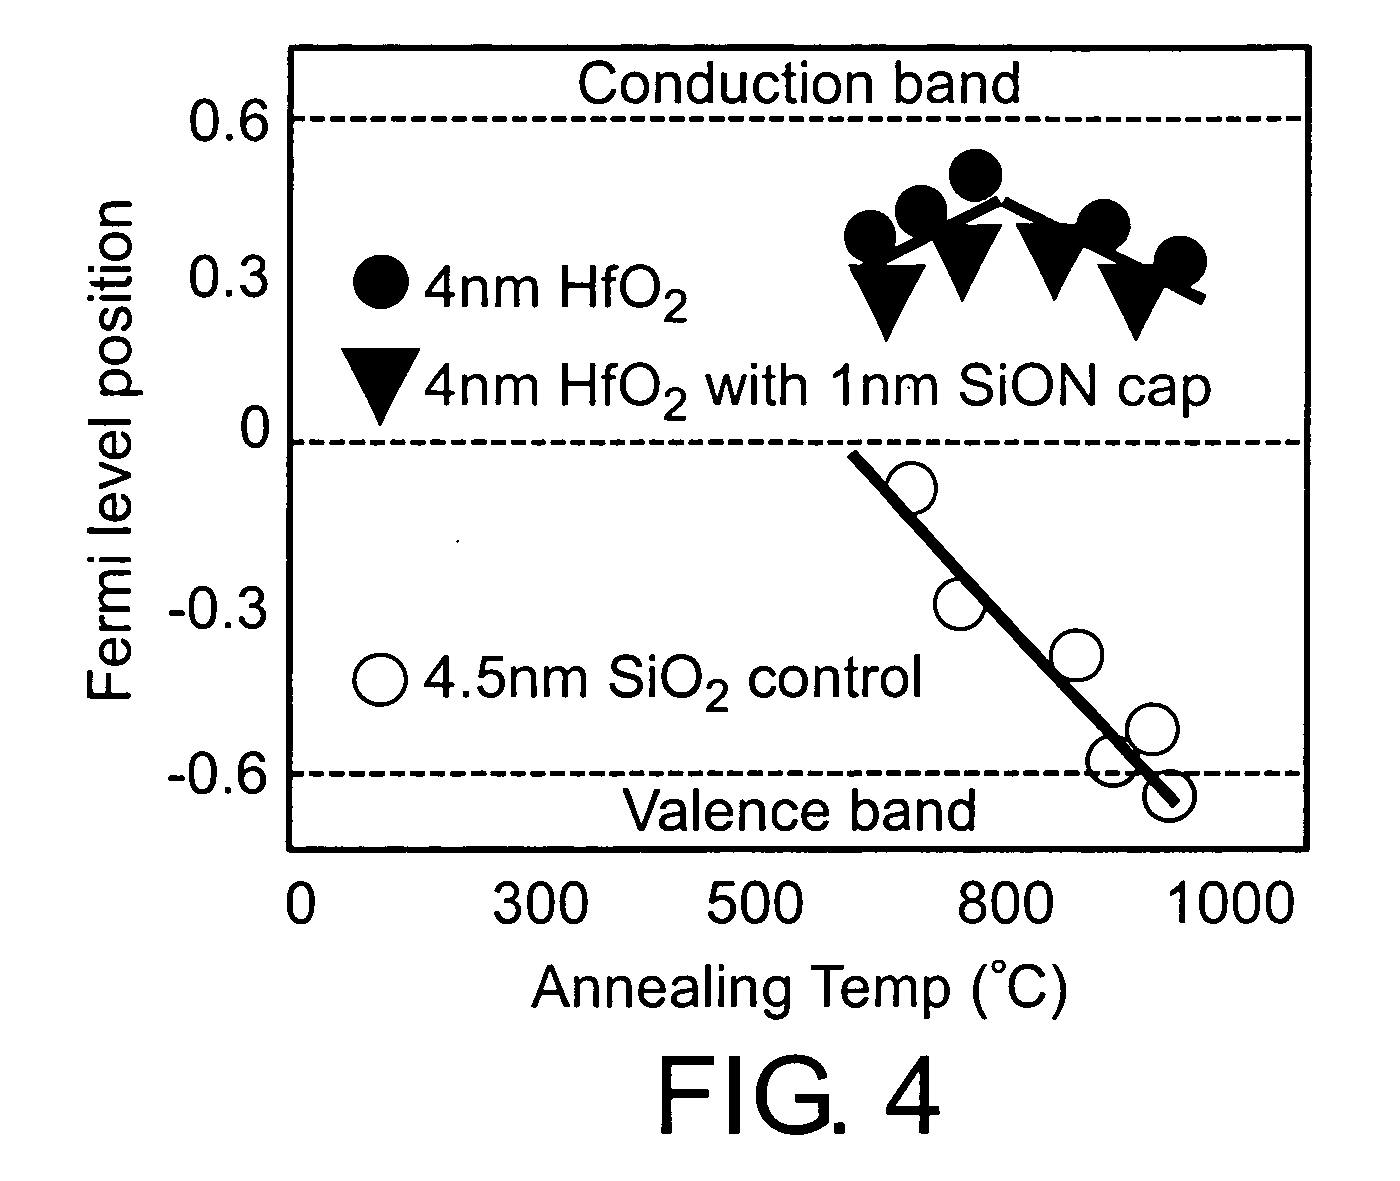 Non-volatile semiconductor memory device with alternative metal gate material